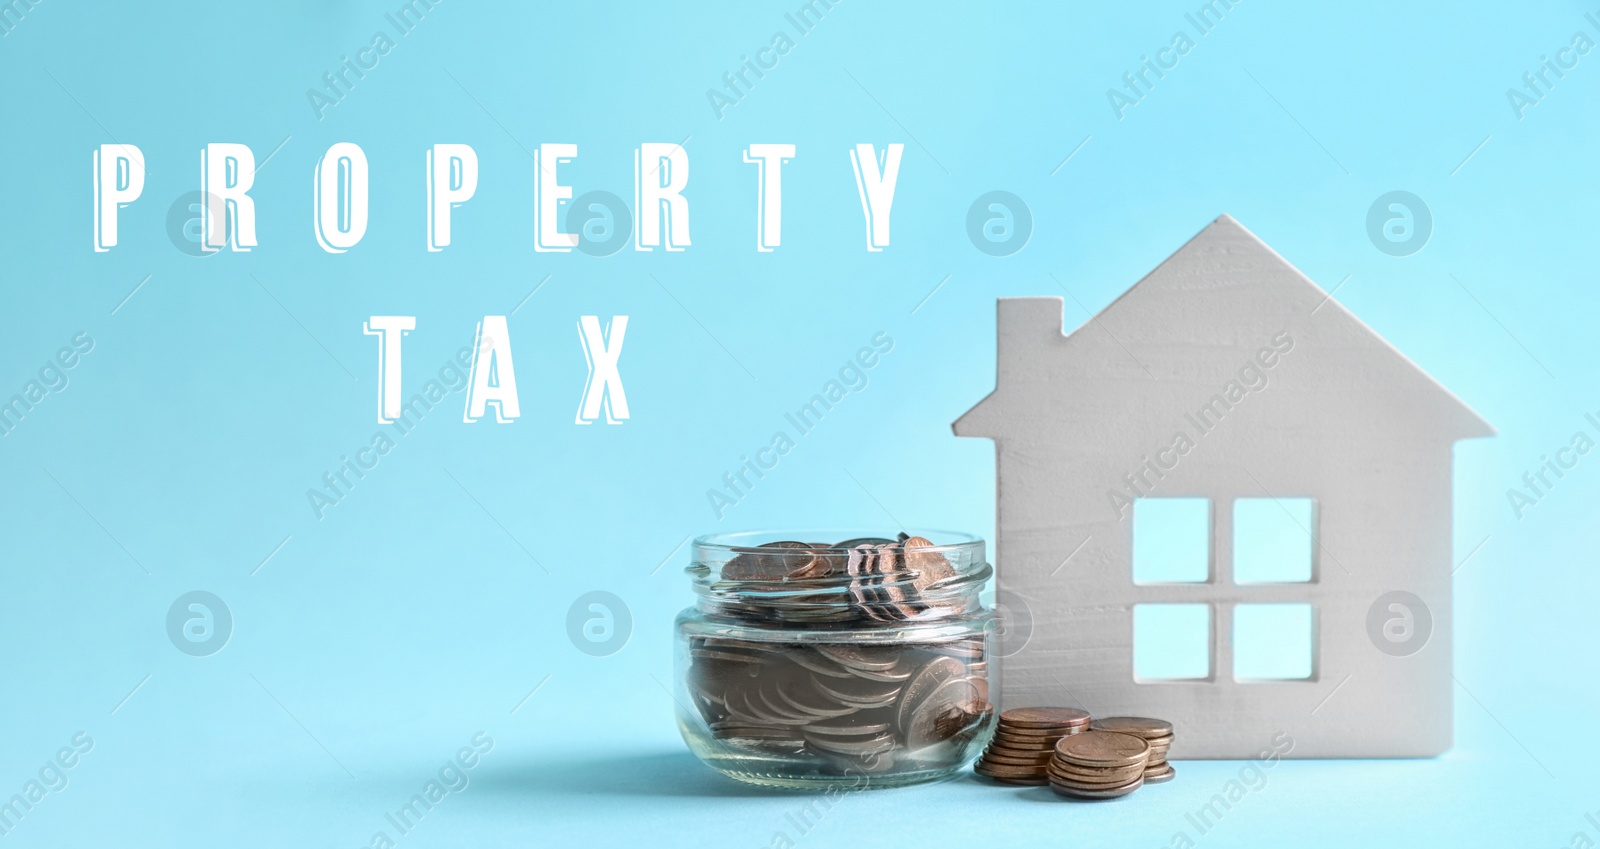 Image of Text Property Tax near jar full of coins and house model on light blue background. Banner design